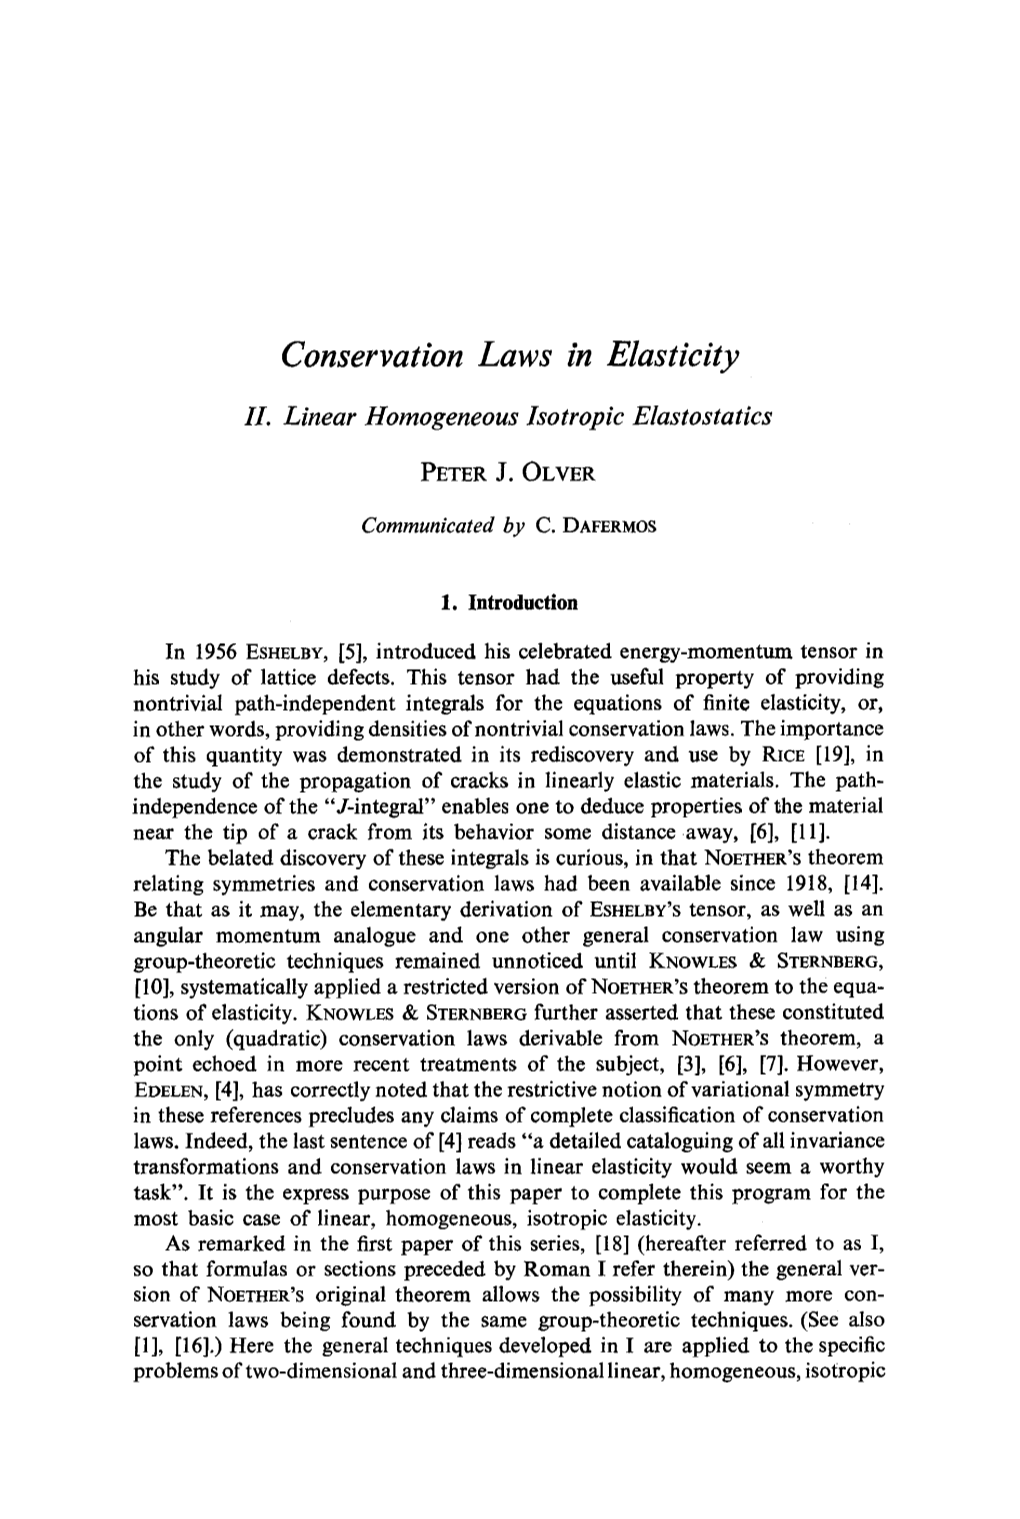 Conservation Laws in Elasticity